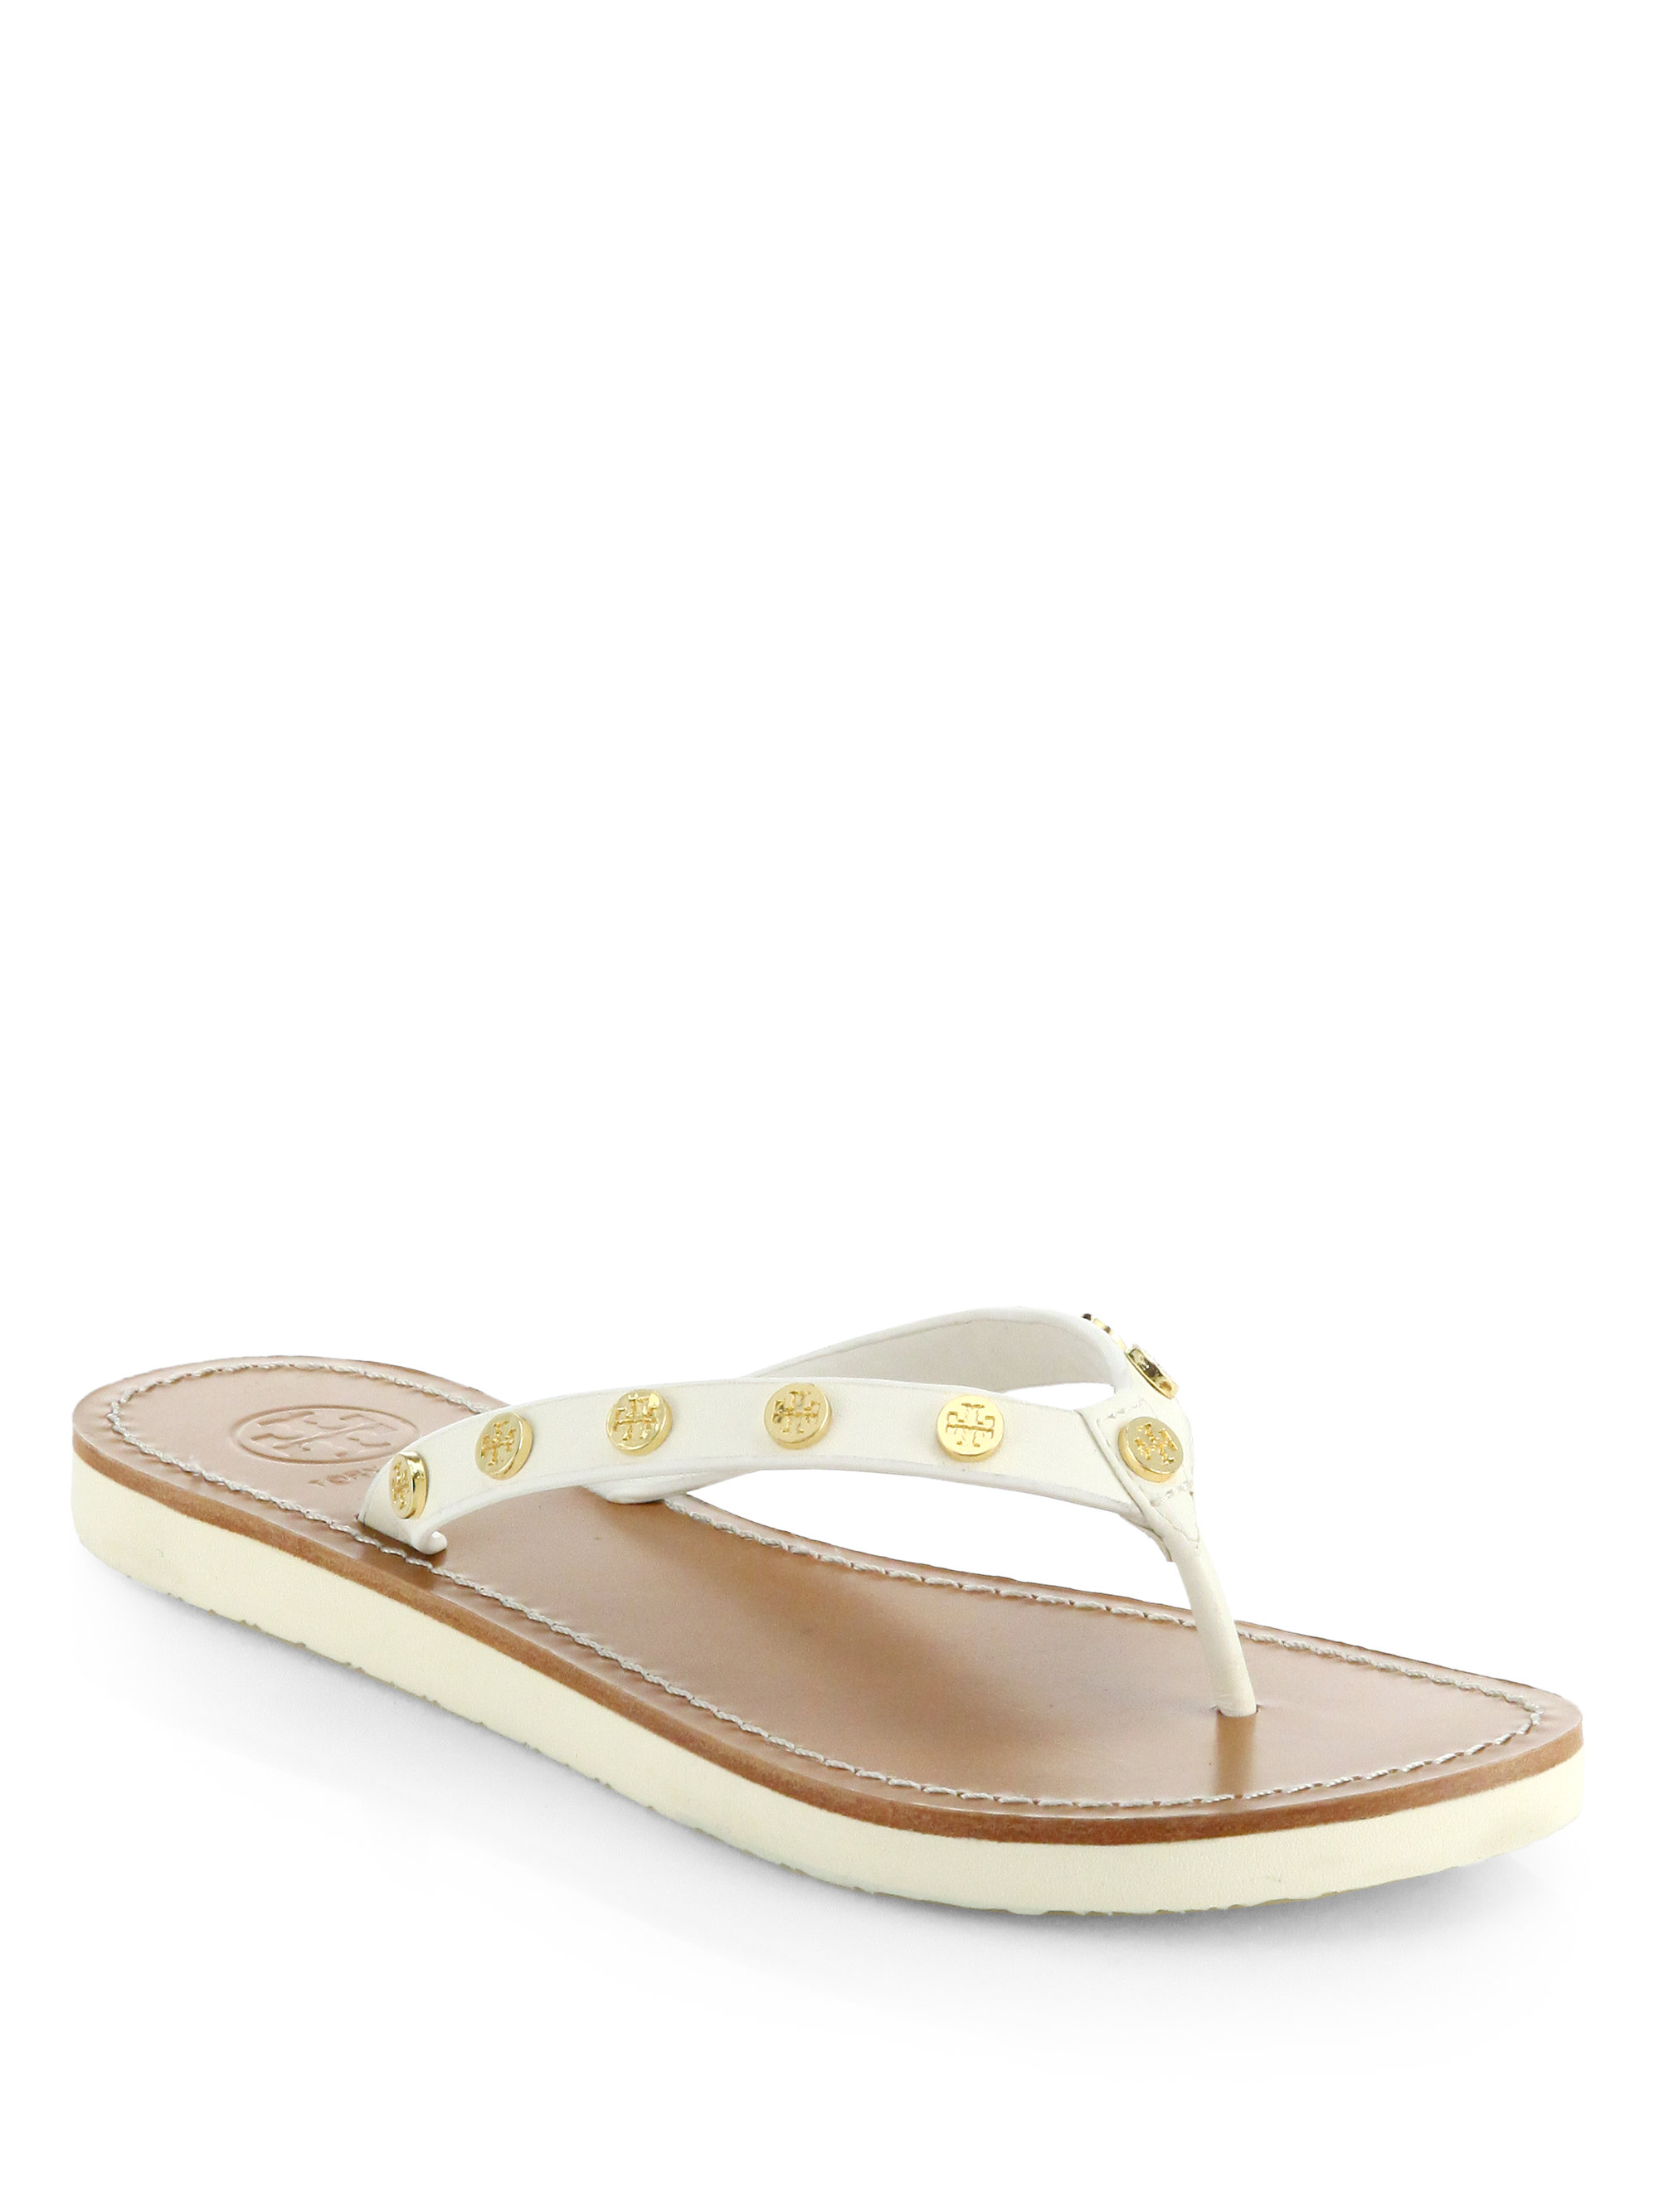 Tory Burch Ricki Studded Leather Thong Flip Flops in Ivory (White) - Lyst